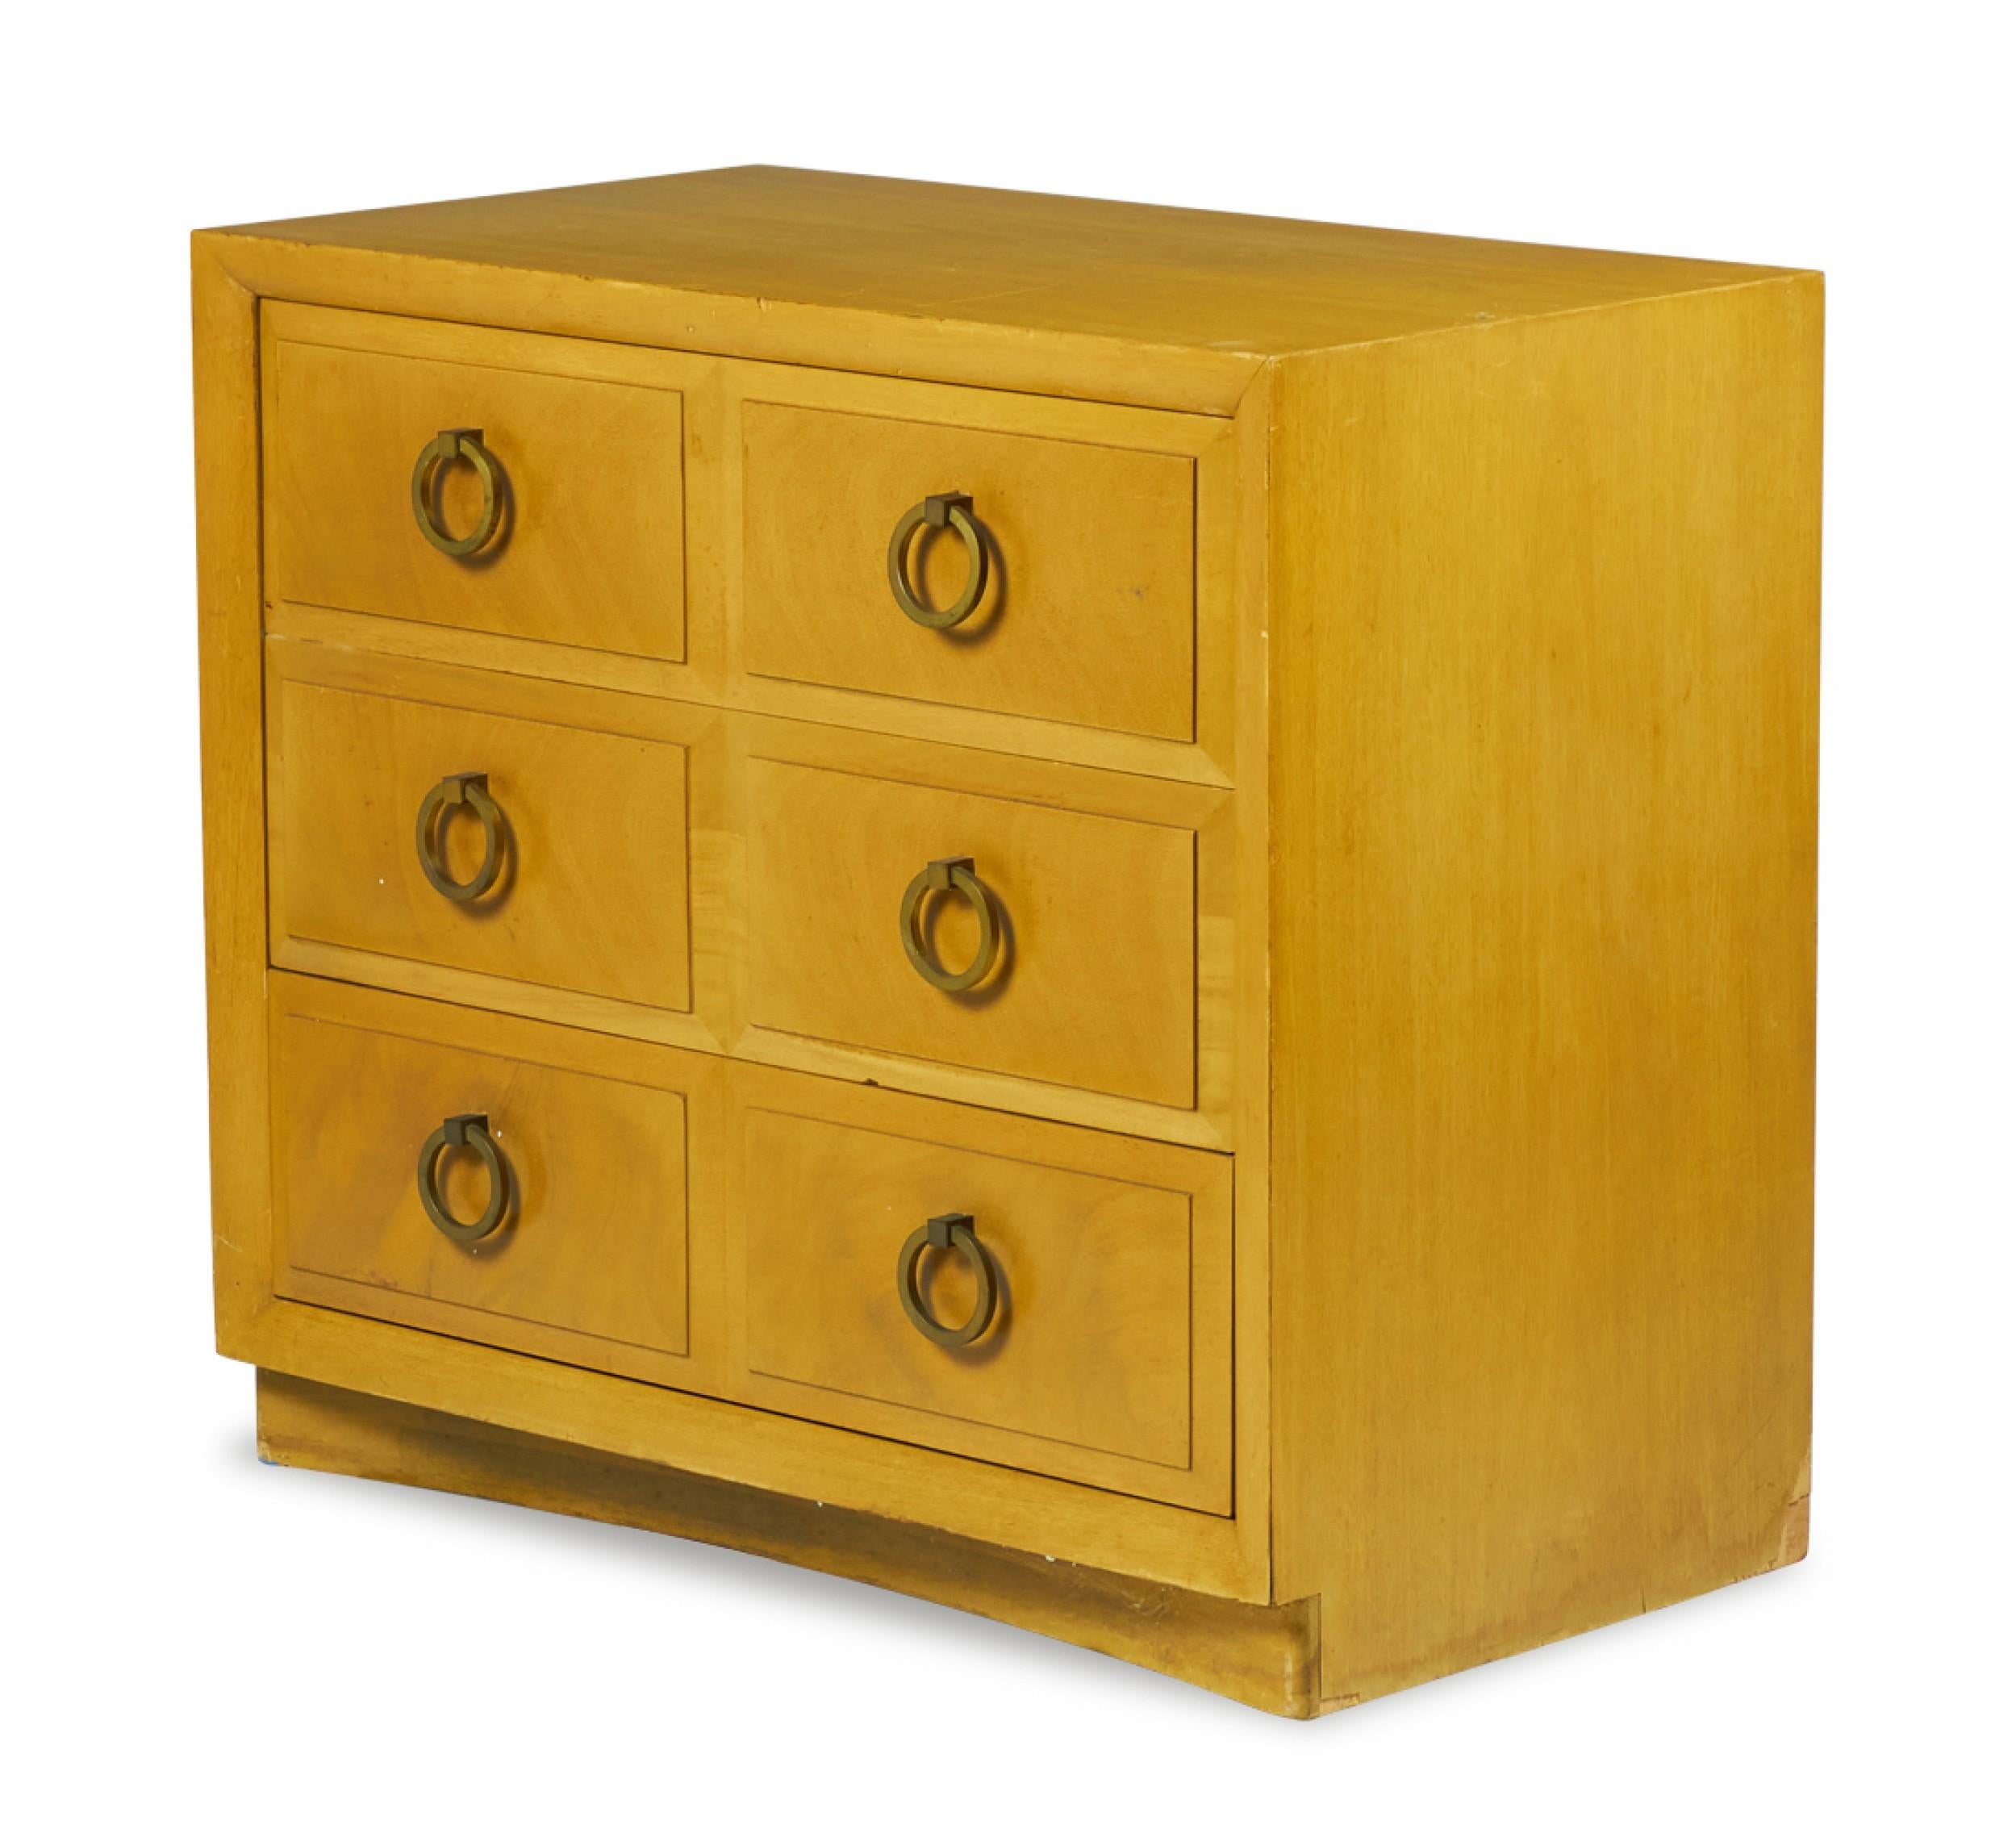 American mid-century (1950s) maple three-drawer chest with beveled drawer fronts and six brass ring-shaped drawer pulls. (T.H. ROBSJOHN-GIBBINGS FOR WIDDICOMB MODERN)
 